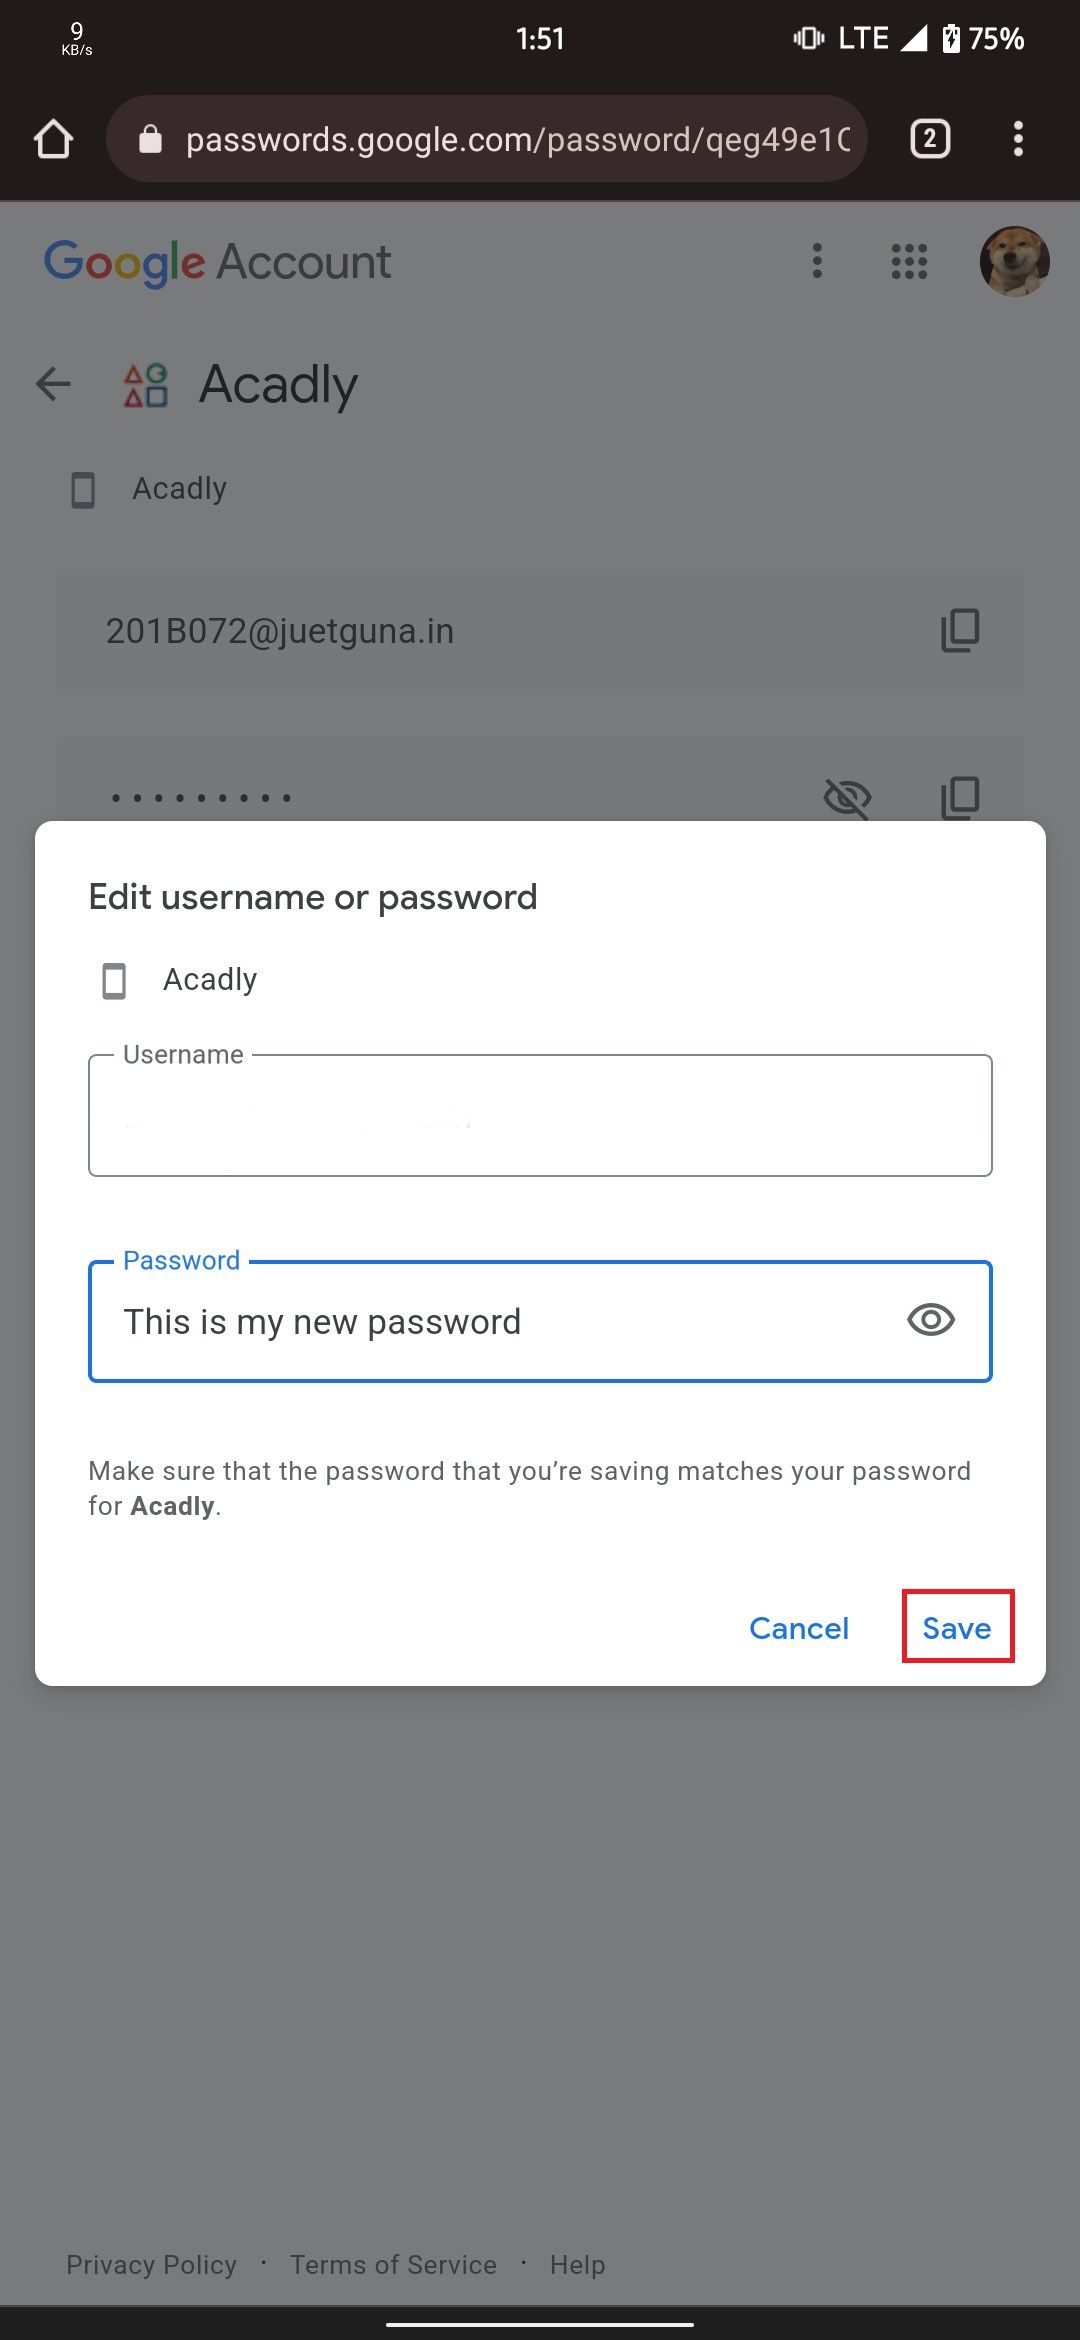 Editing password page where the password can be edited